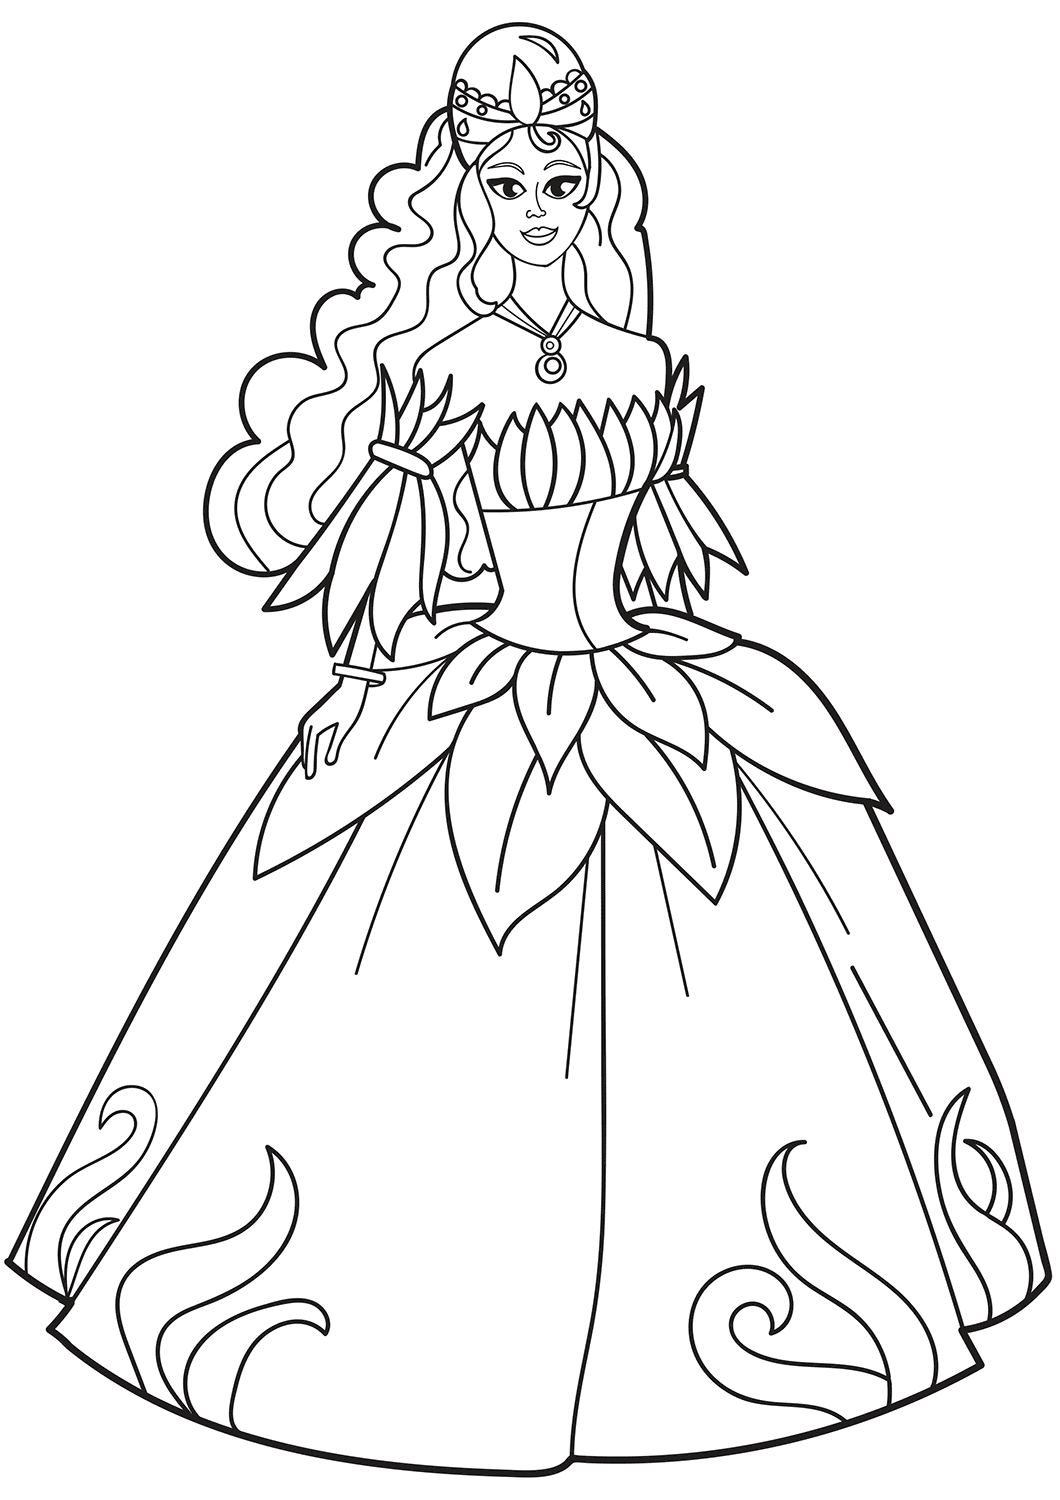 Princess In Flower Dress Coloring Page